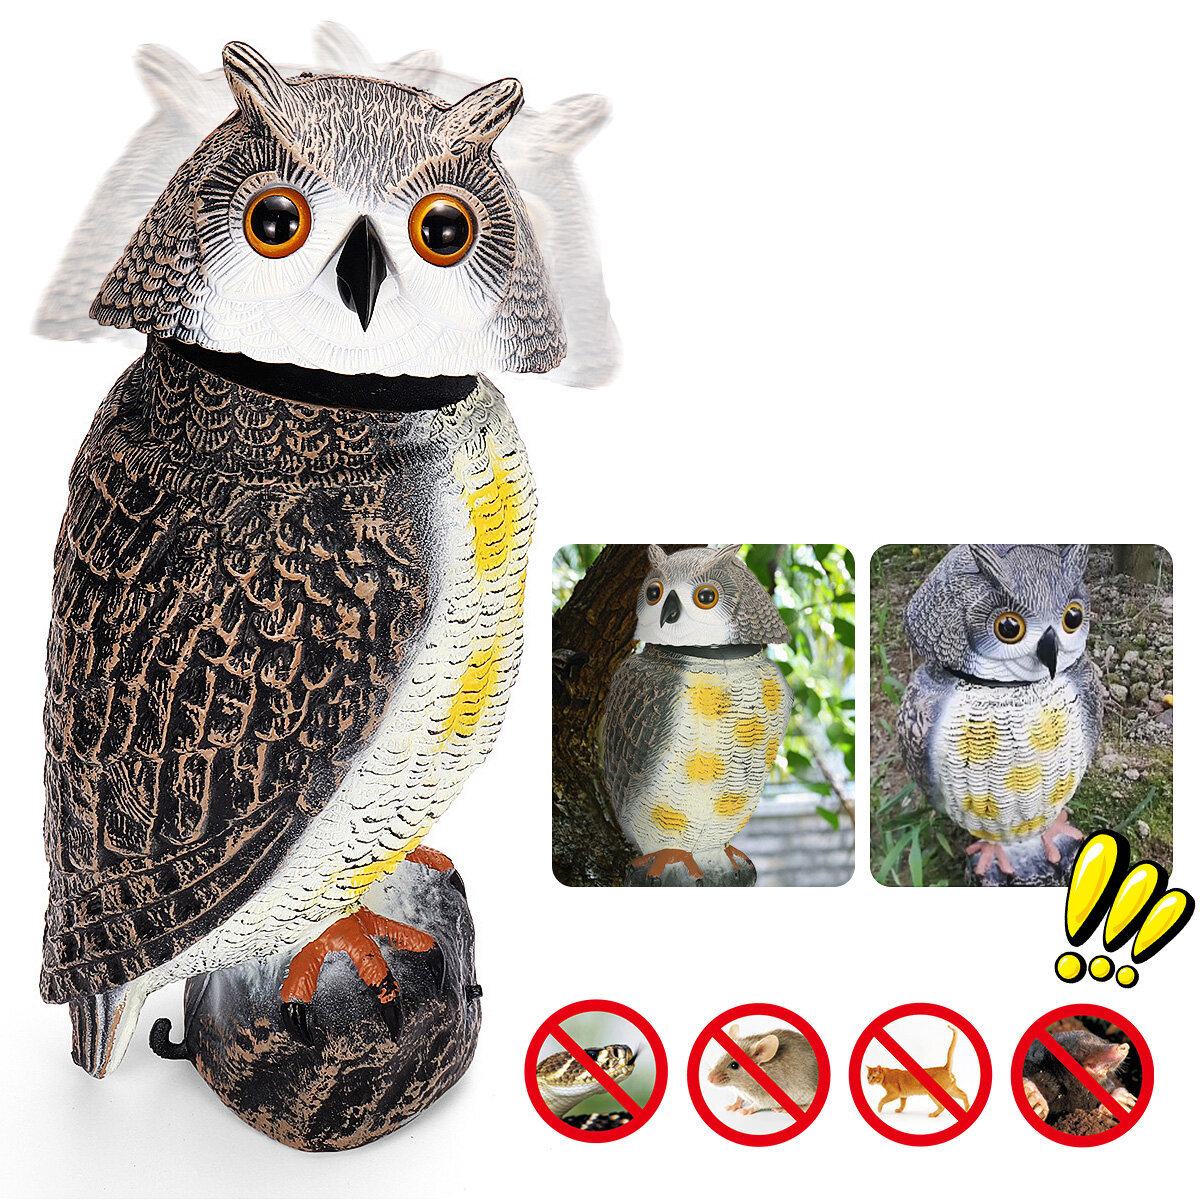 

Rotating Head Simulation Owl Realistic Rodent Deterrent Scare Outdoor Garden Hunting Decoy